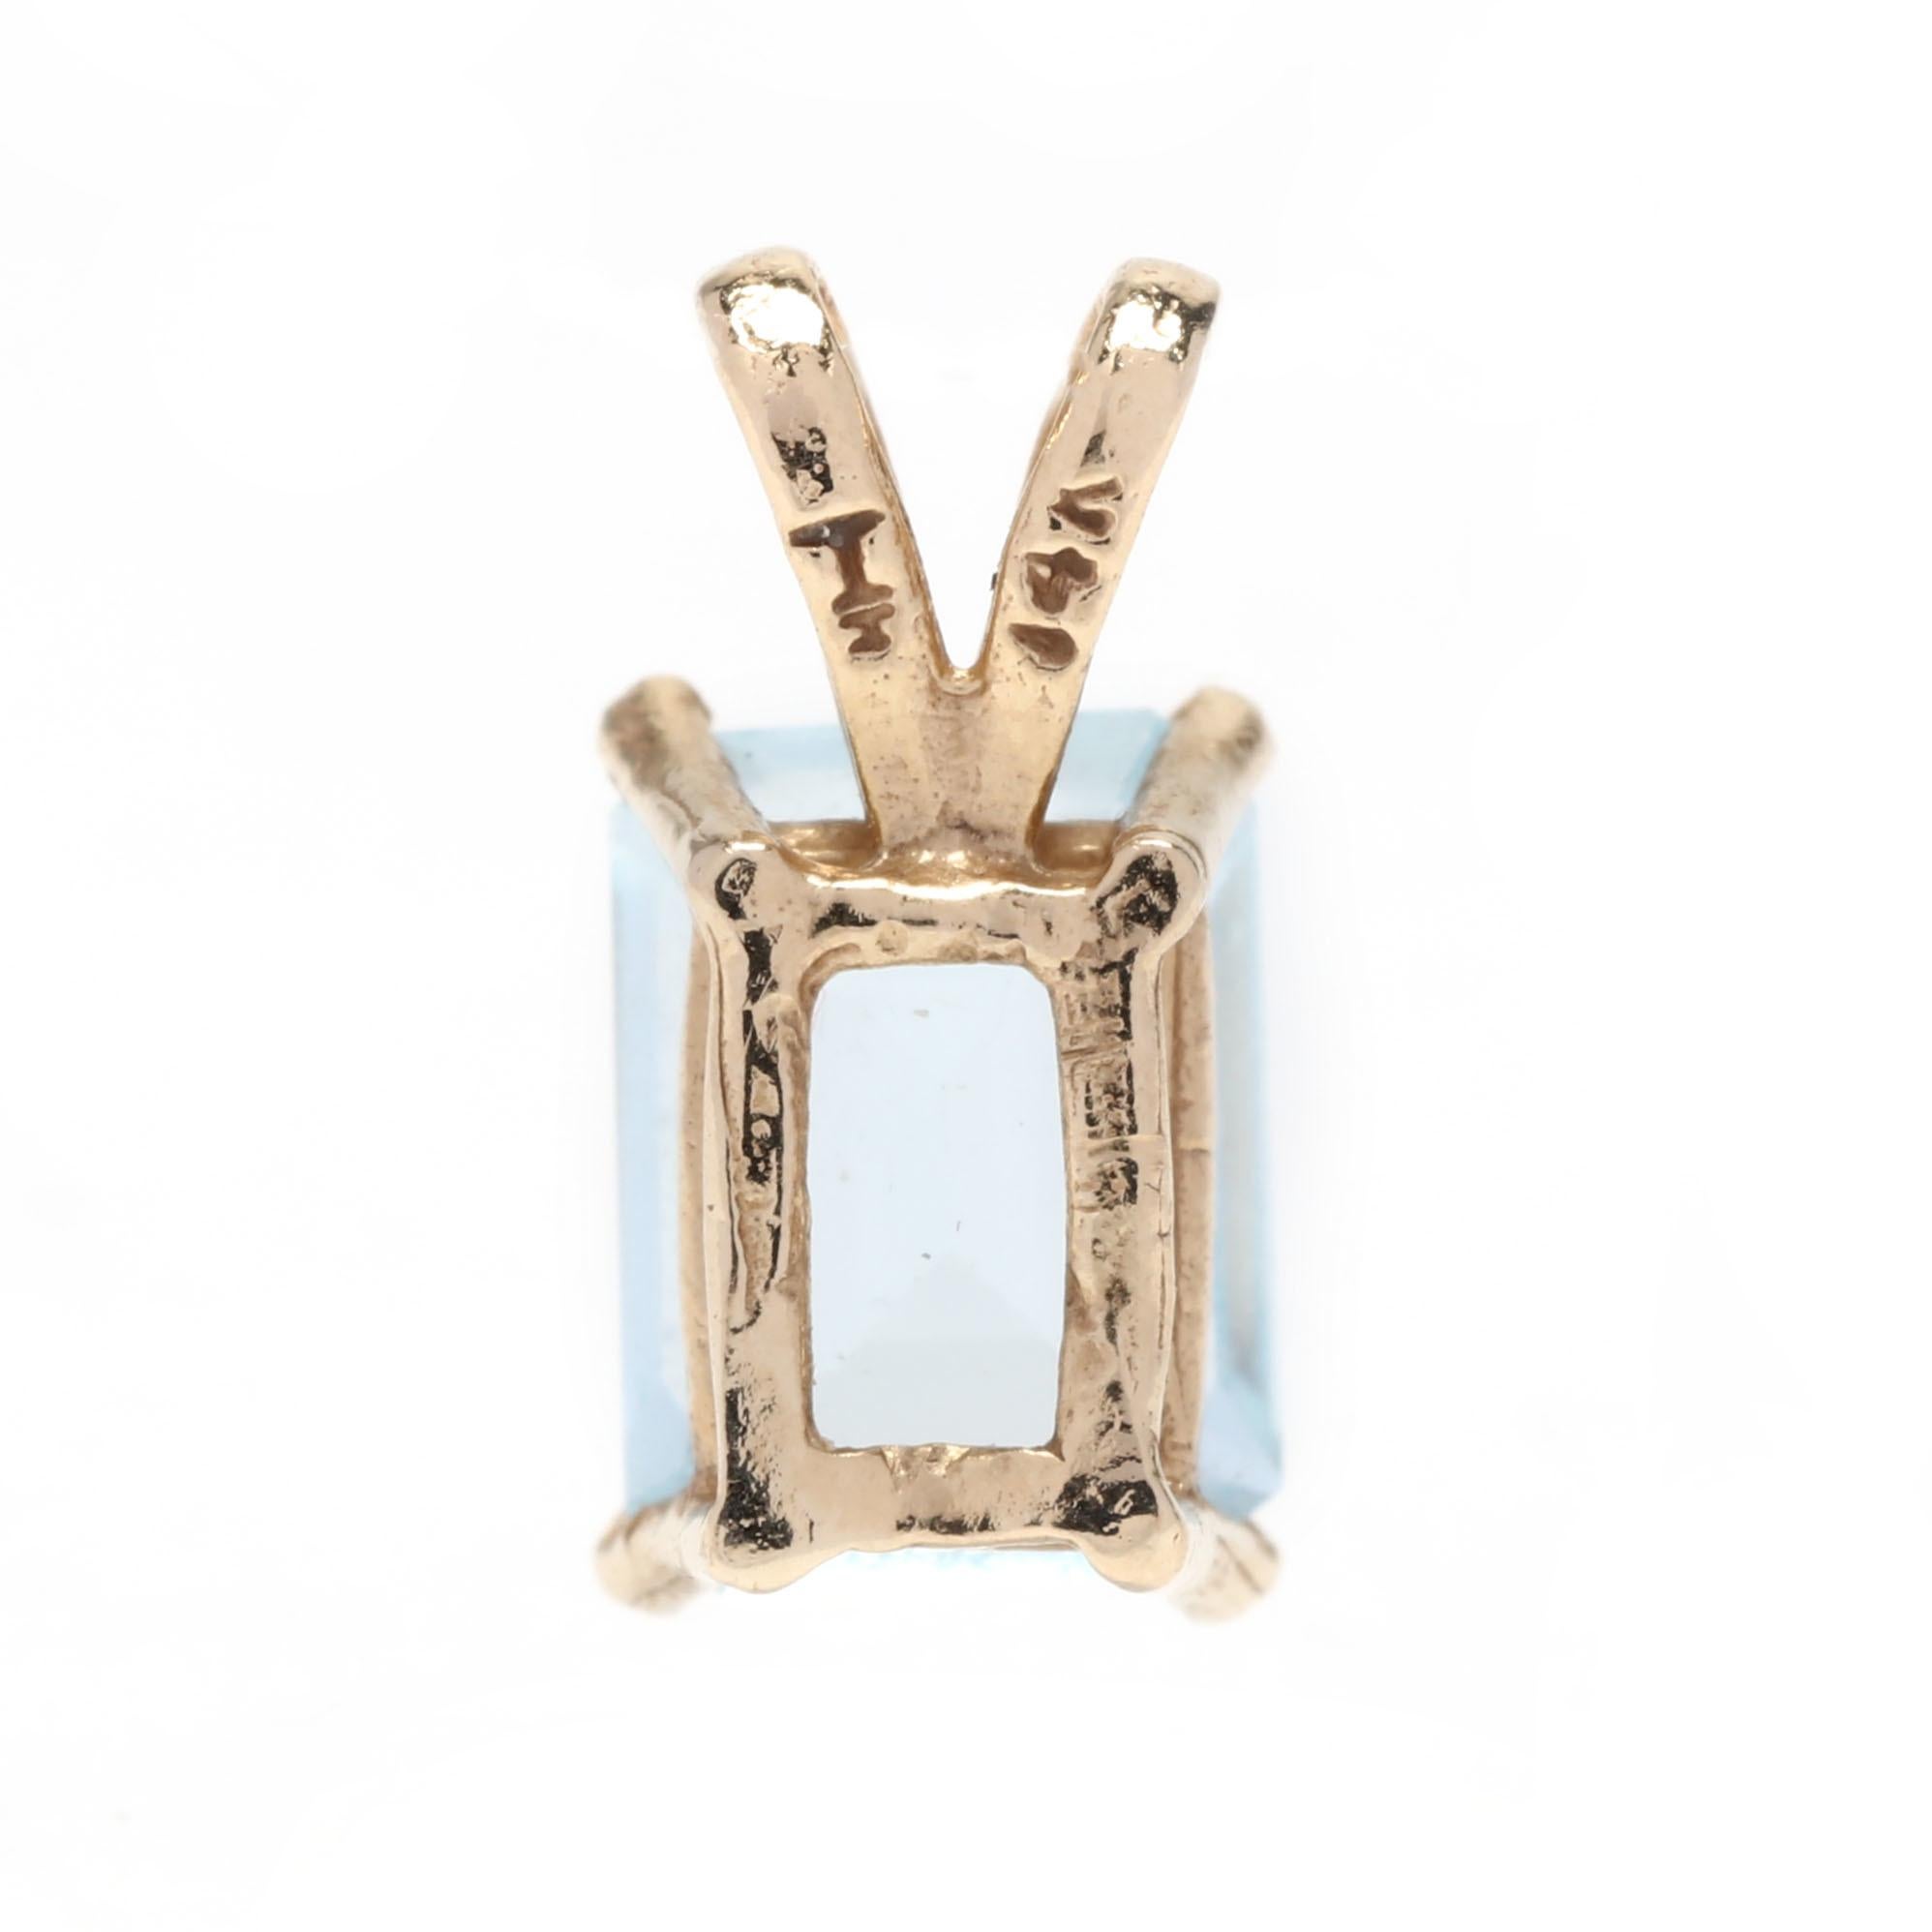 A 14 karat yellow gold emerald cut blue topaz pendant. This pendant features a prong set, emerald cut light blue topaz stone weighing approximately 2 carats and with a split bail.



Stones:

- blue topaz, 1 stone

- emerald cut

- 8 x 6 mm

-